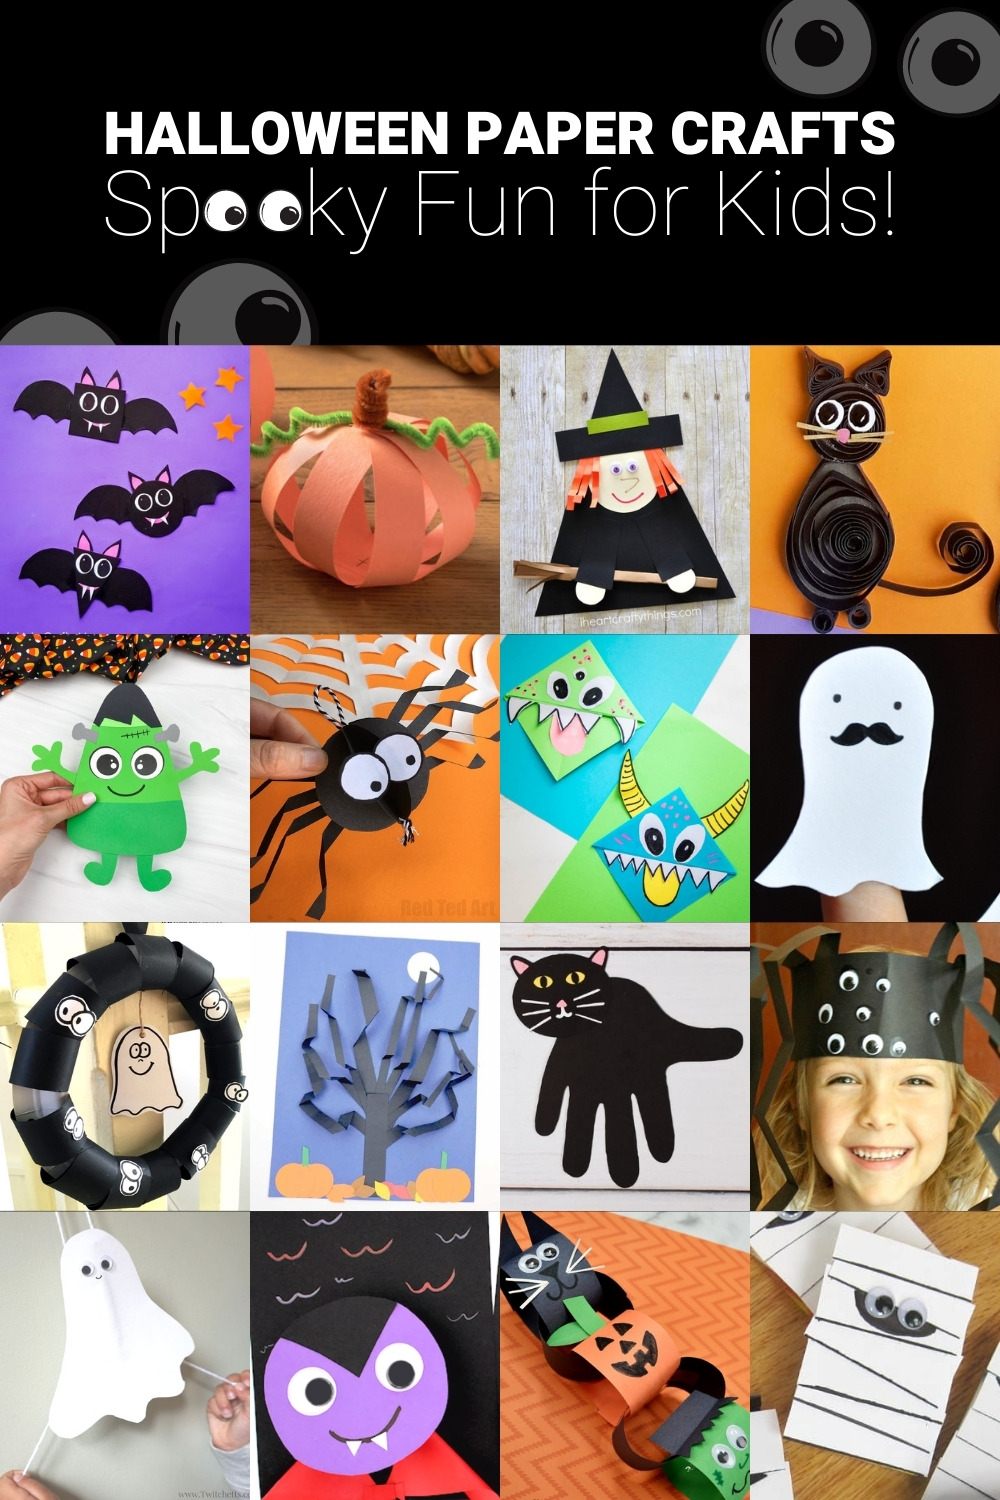 Spooky Fun Halloween Paper Crafts for Kids